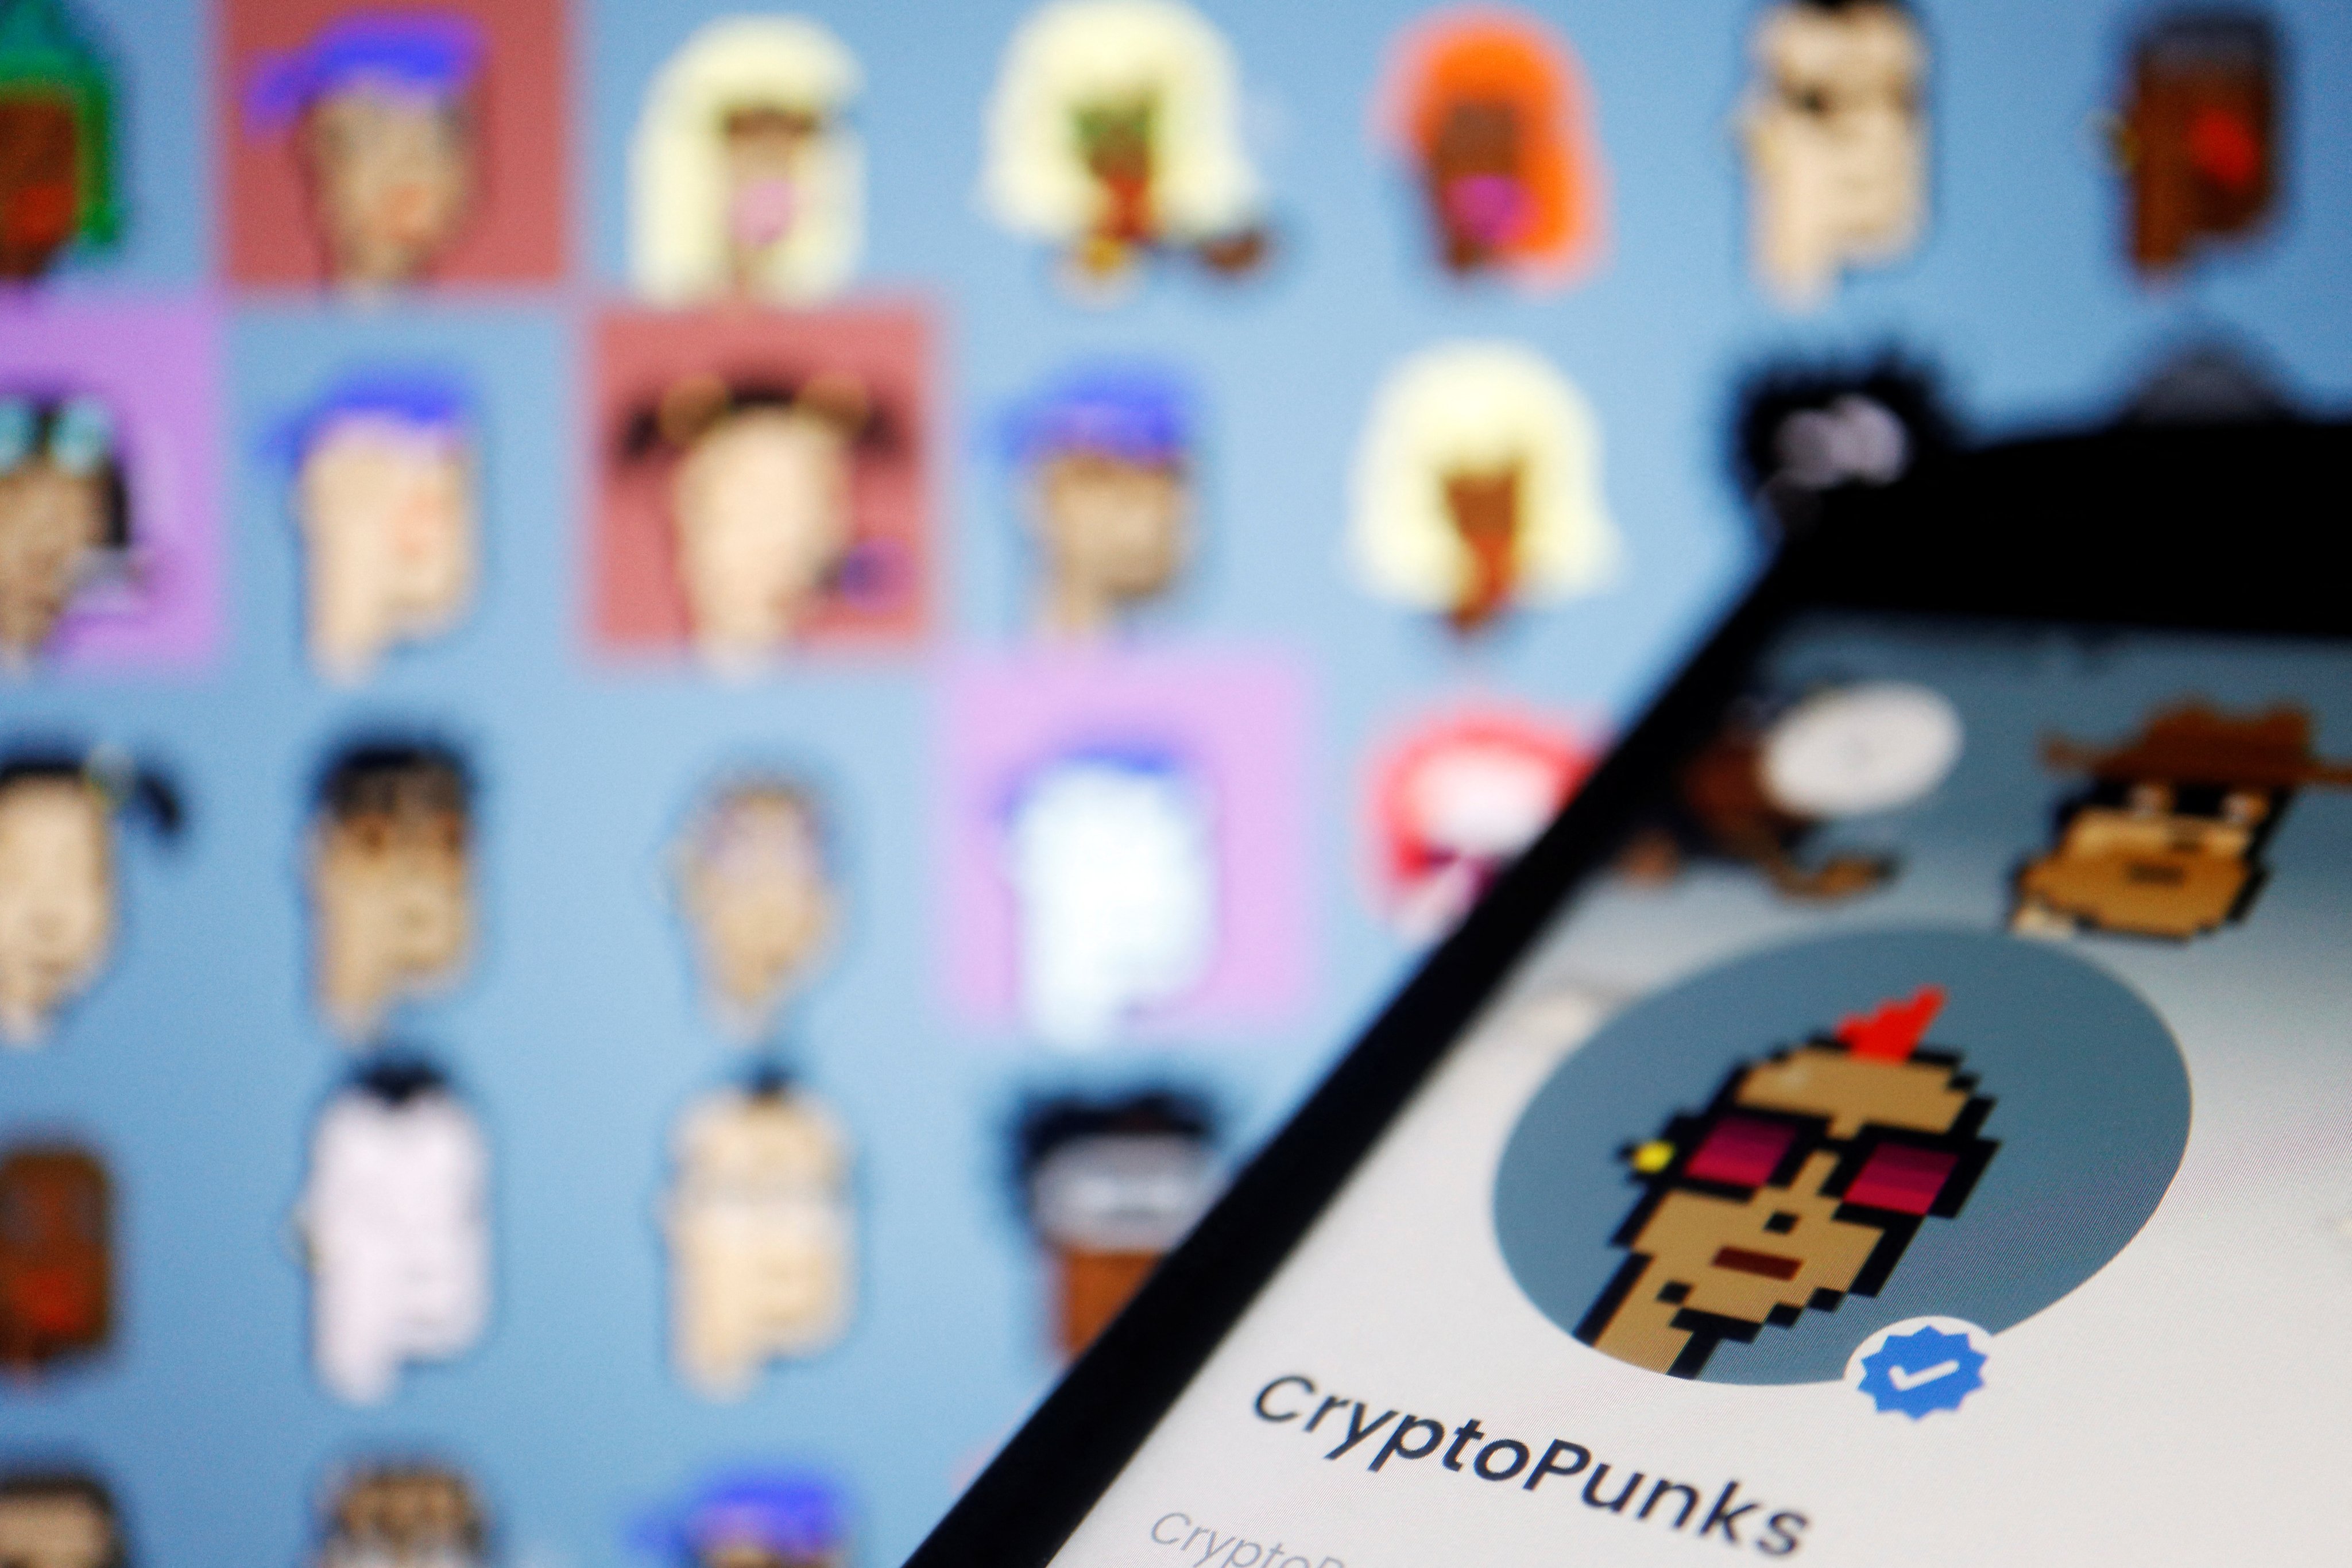 The CryptoPunks page on OpenSea app is displayed next to non-fungible tokens (NFTs) of the CryptoPunks collection by Larva Labs shown on its website, in March 2022. Photo: Reuters